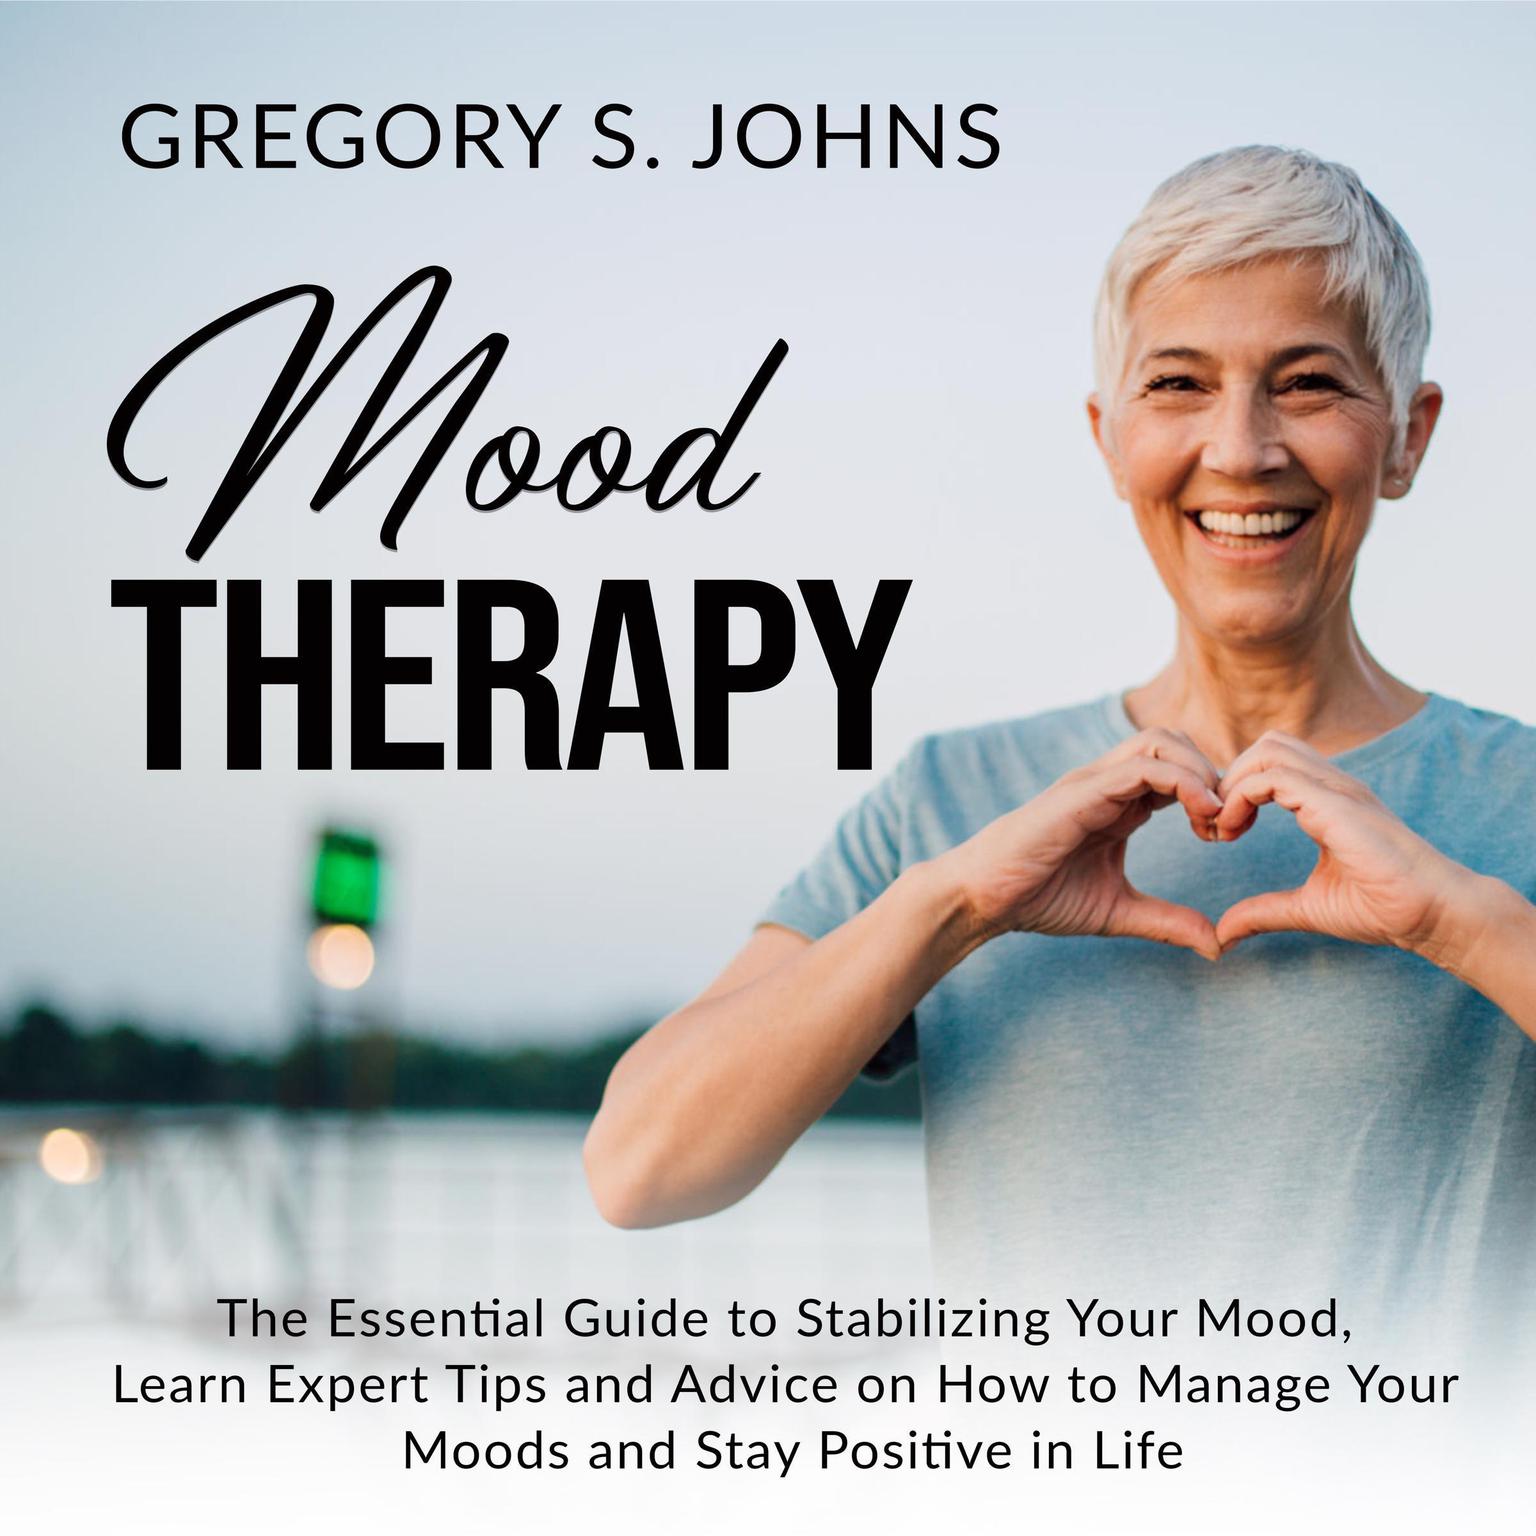 Mood Therapy: The Essential Guide to Stabilizing Your Mood, Learn Expert Tips and Advice on How to Manage Your Moods and Stay Positive in Life Audiobook, by Gregory S. Johns